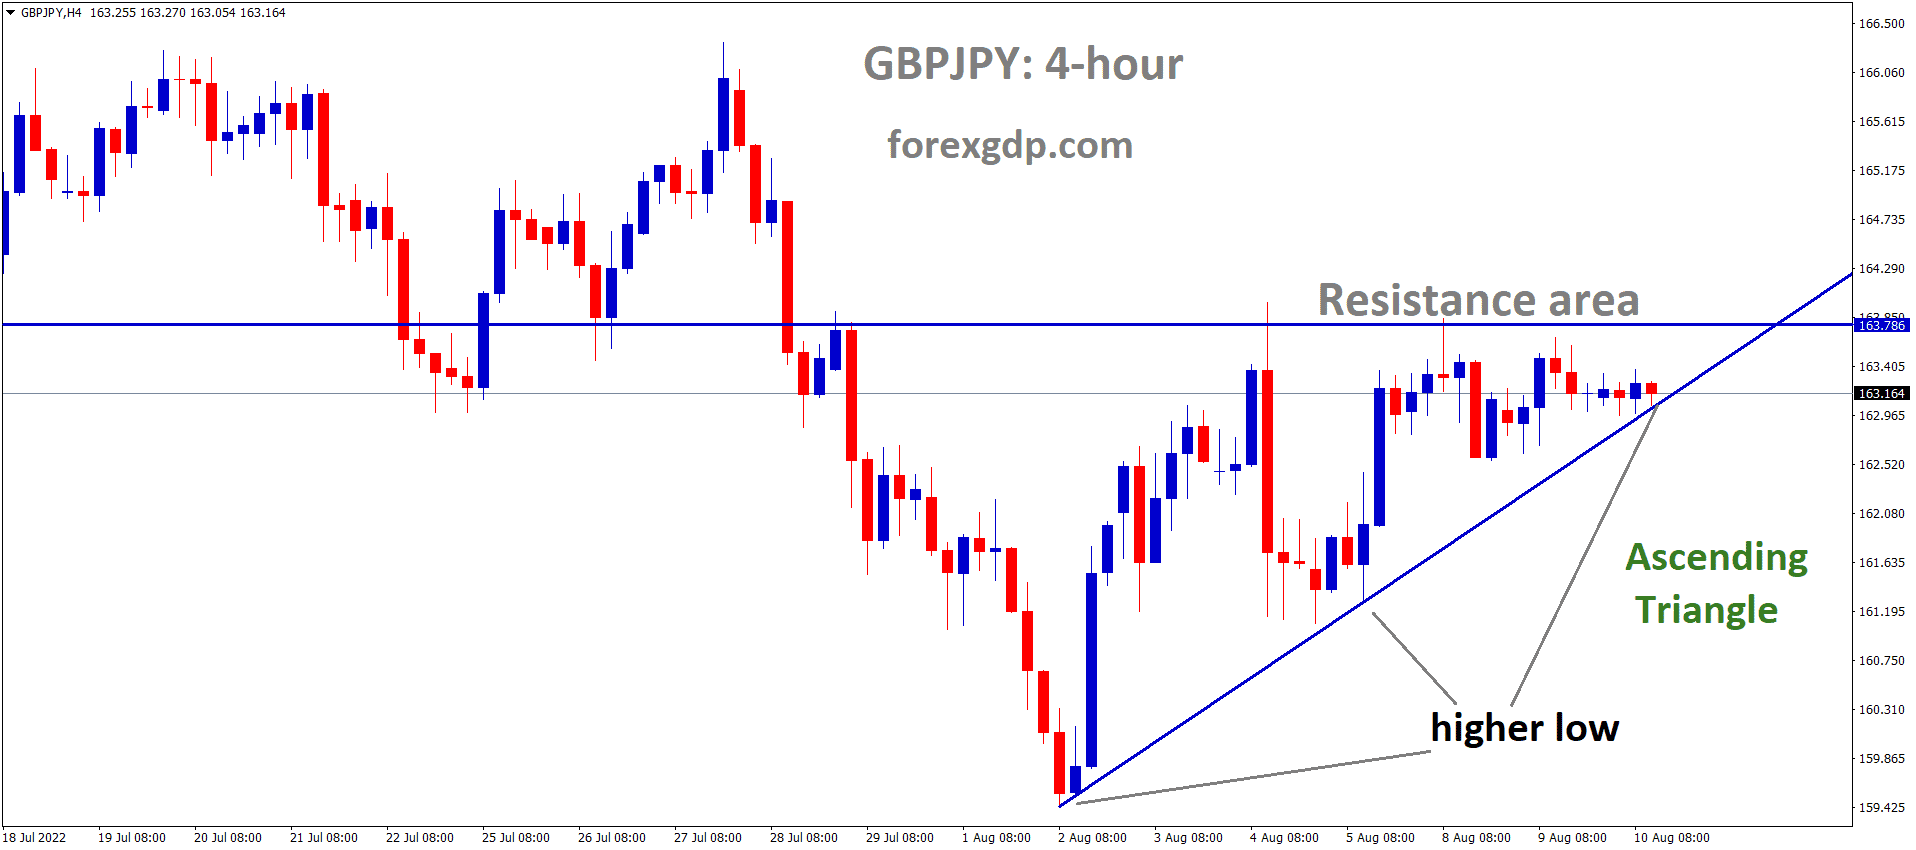 GBPJPY is moving in an Ascending triangle pattern and the Market has reached the higher low area of the triangle pattern